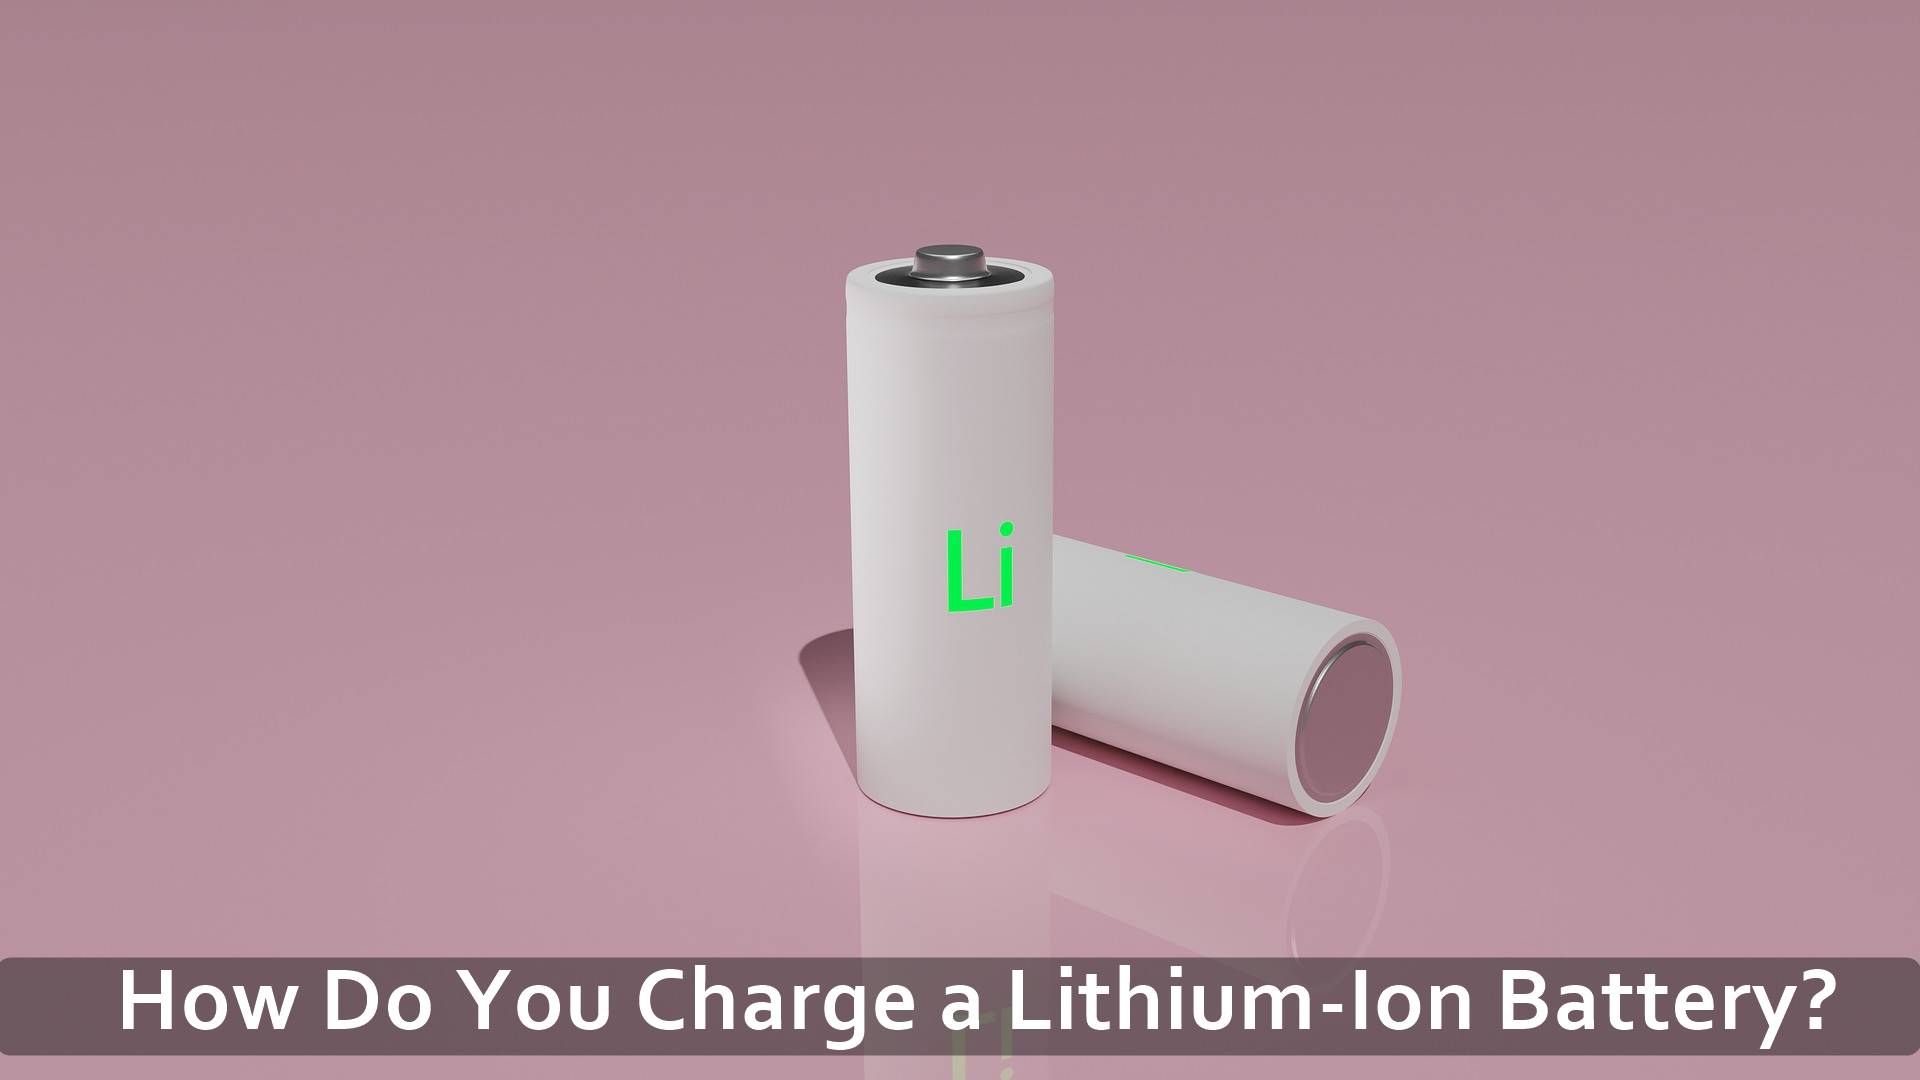 How Do You Charge a Lithium-Ion Battery?